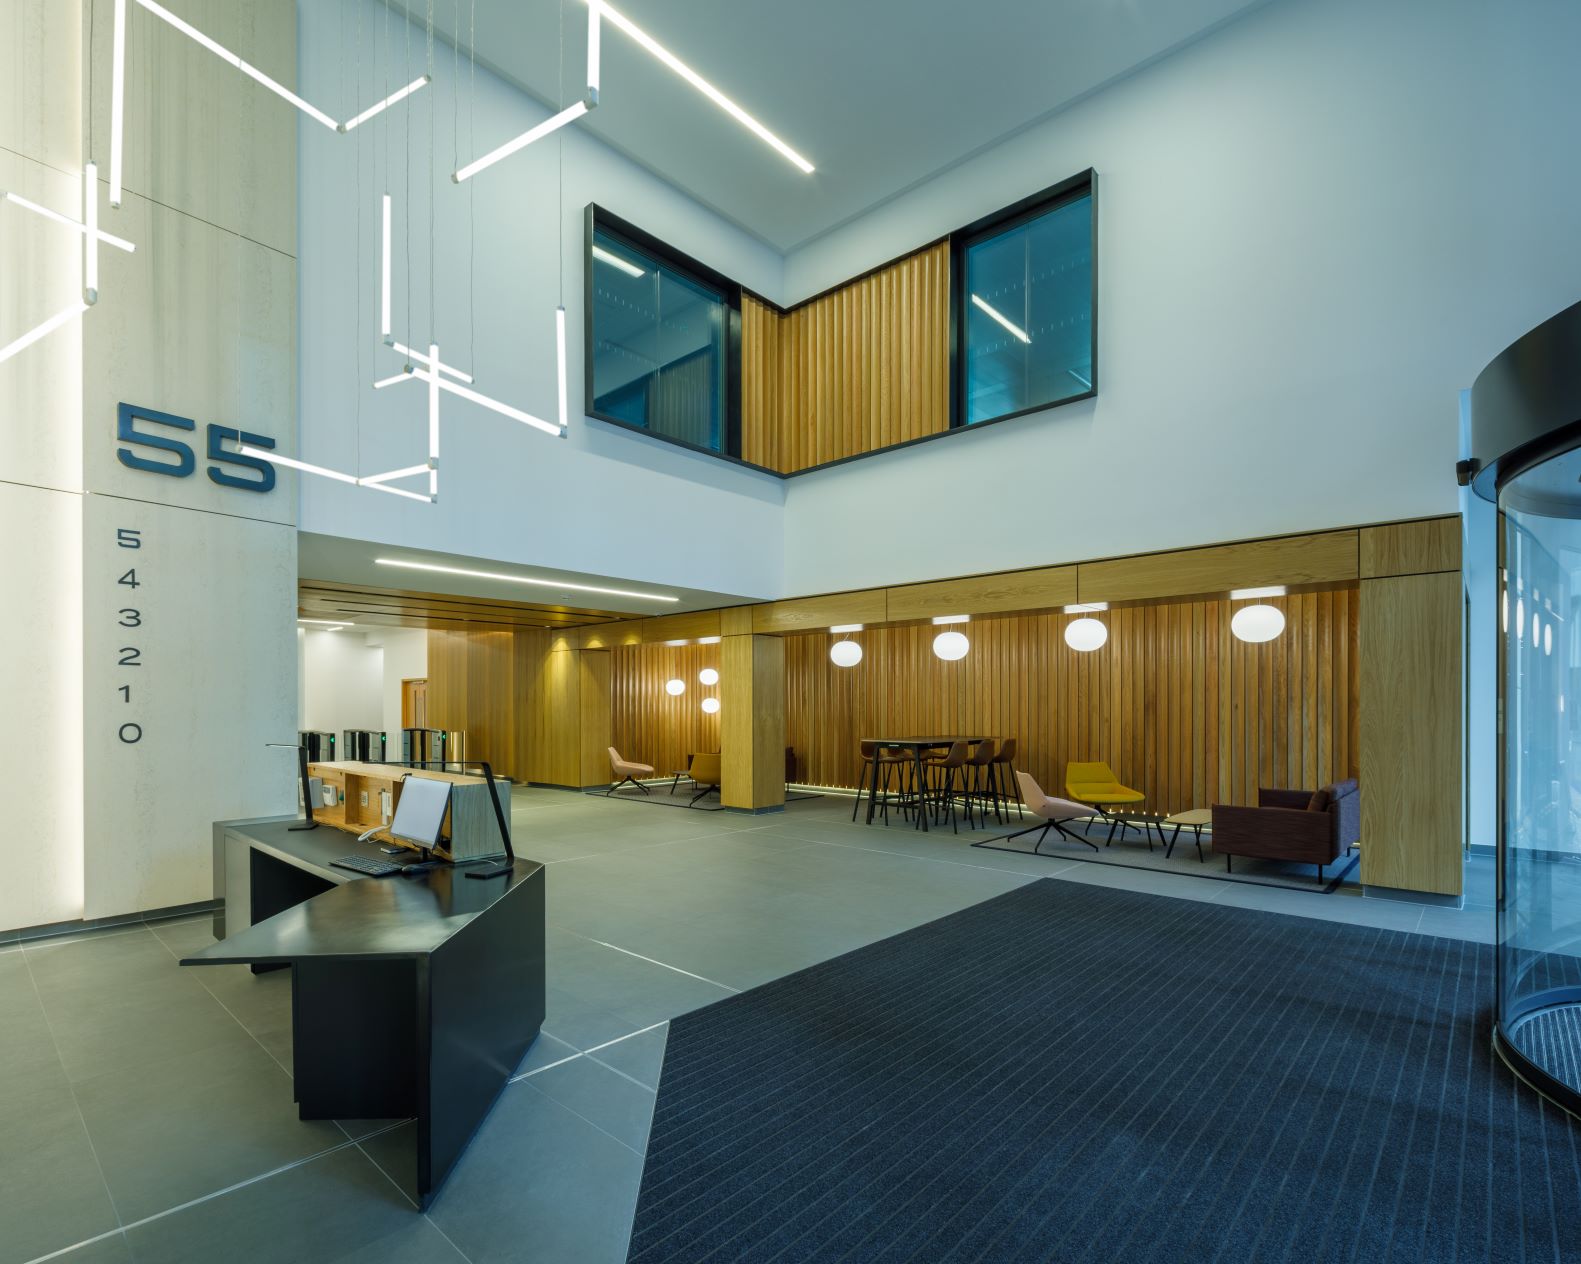 Clark Contracts completes major fit-out of 55 Douglas Street